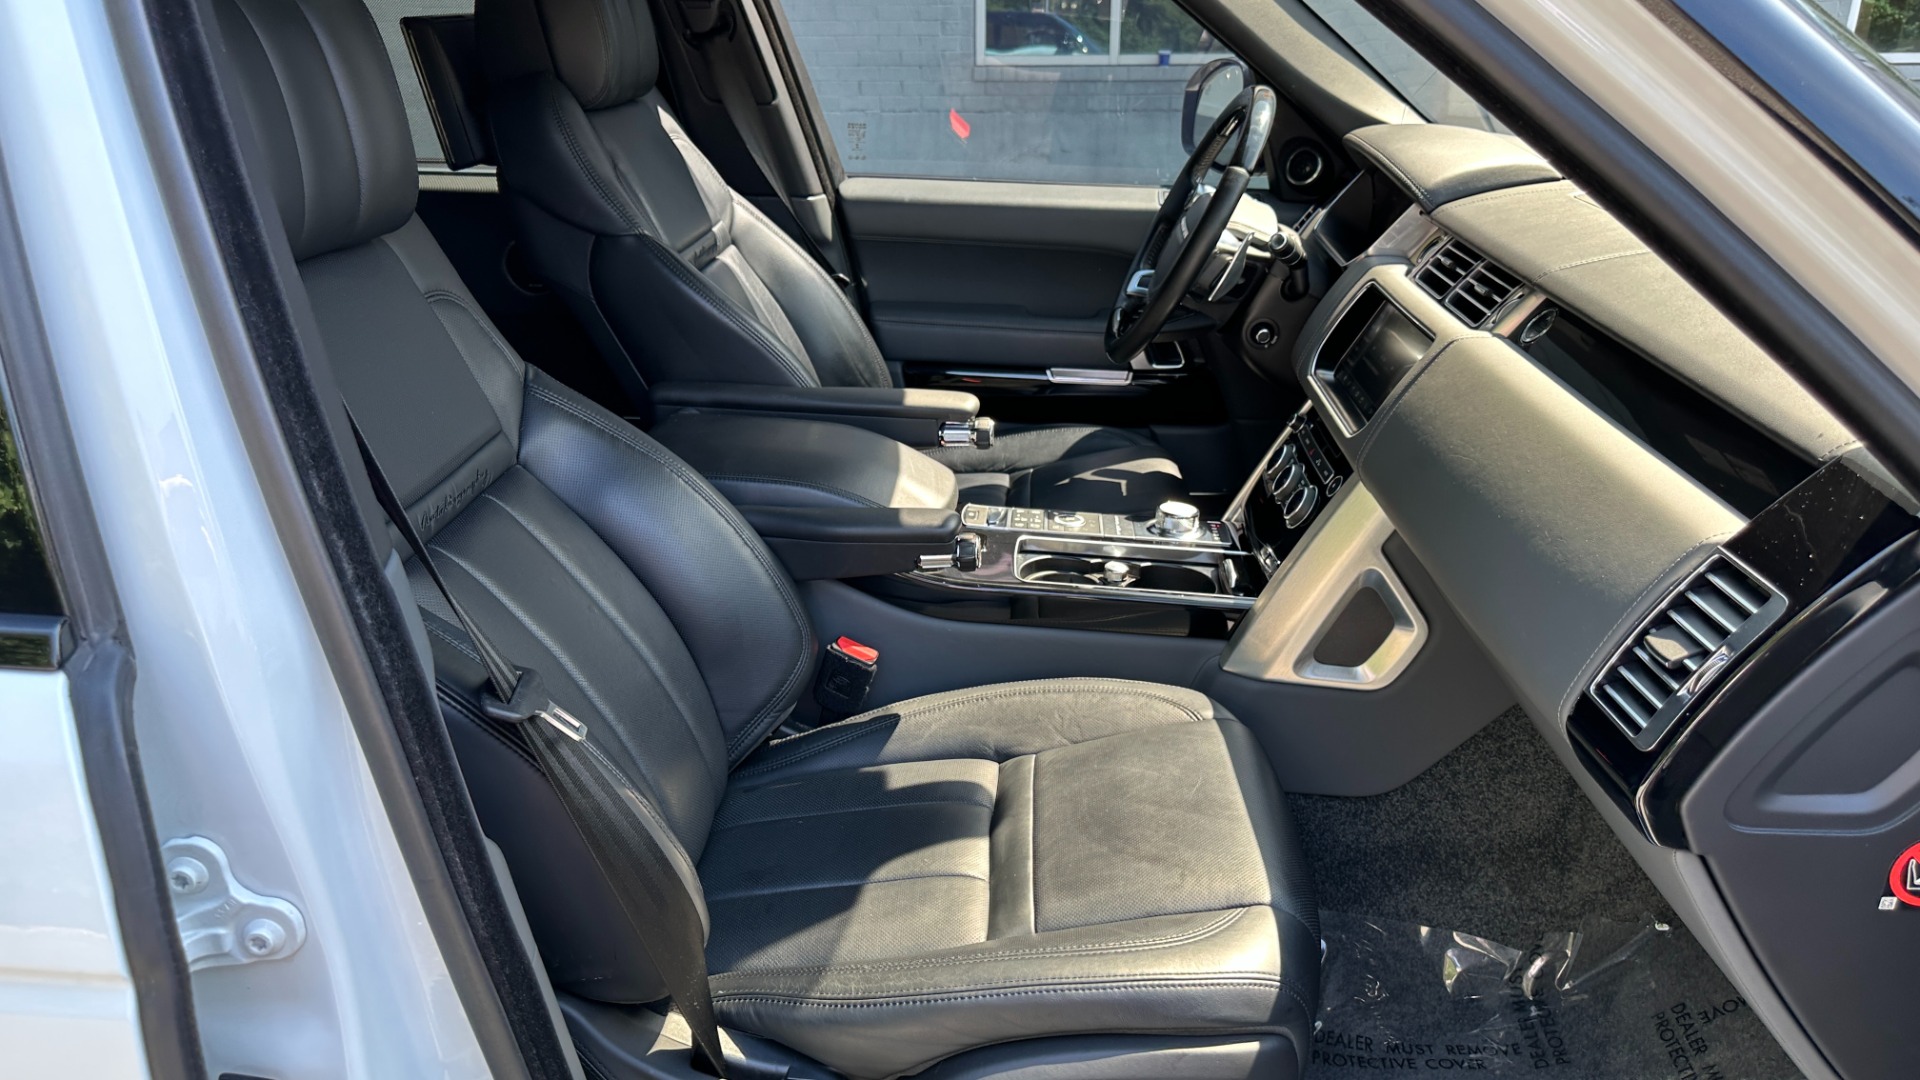 Used 2017 Land Rover Range Rover SV AUTOBIOGRAPHY / LOADED / REAR MASSAGE / EXECUTIVE SEATING / LWB for sale $75,900 at Formula Imports in Charlotte NC 28227 44